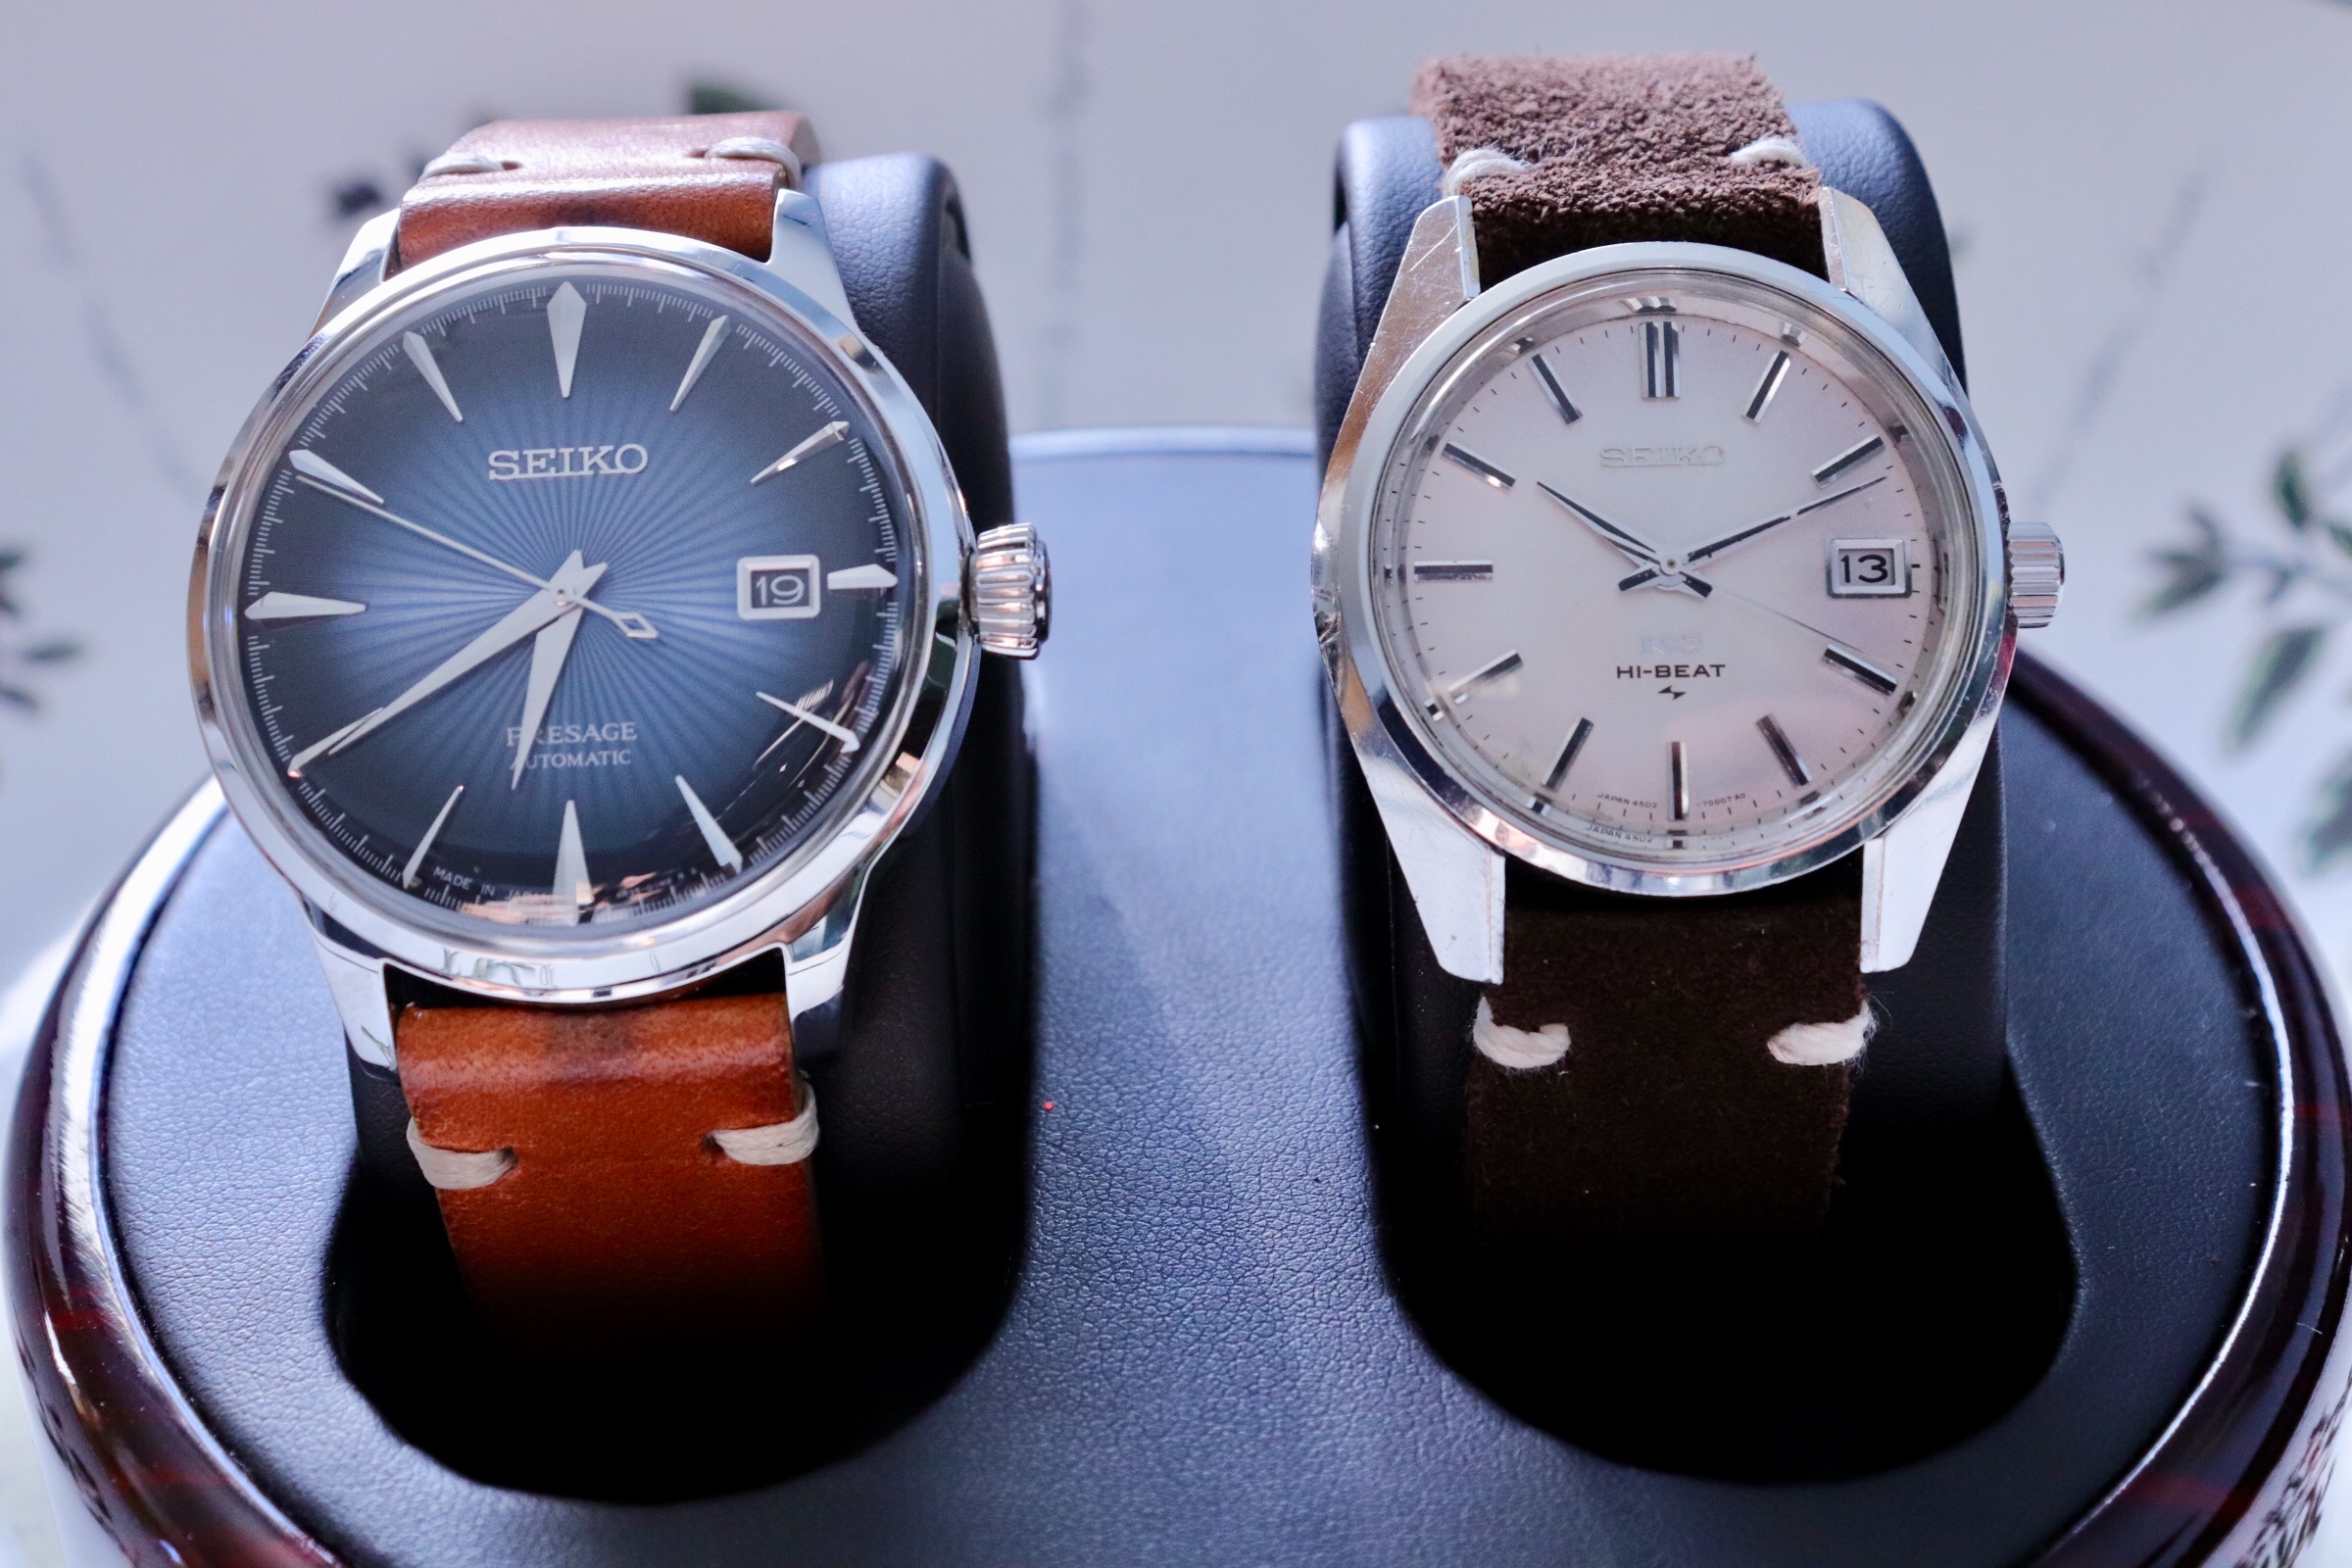 Comparisons – The Watch Consumer